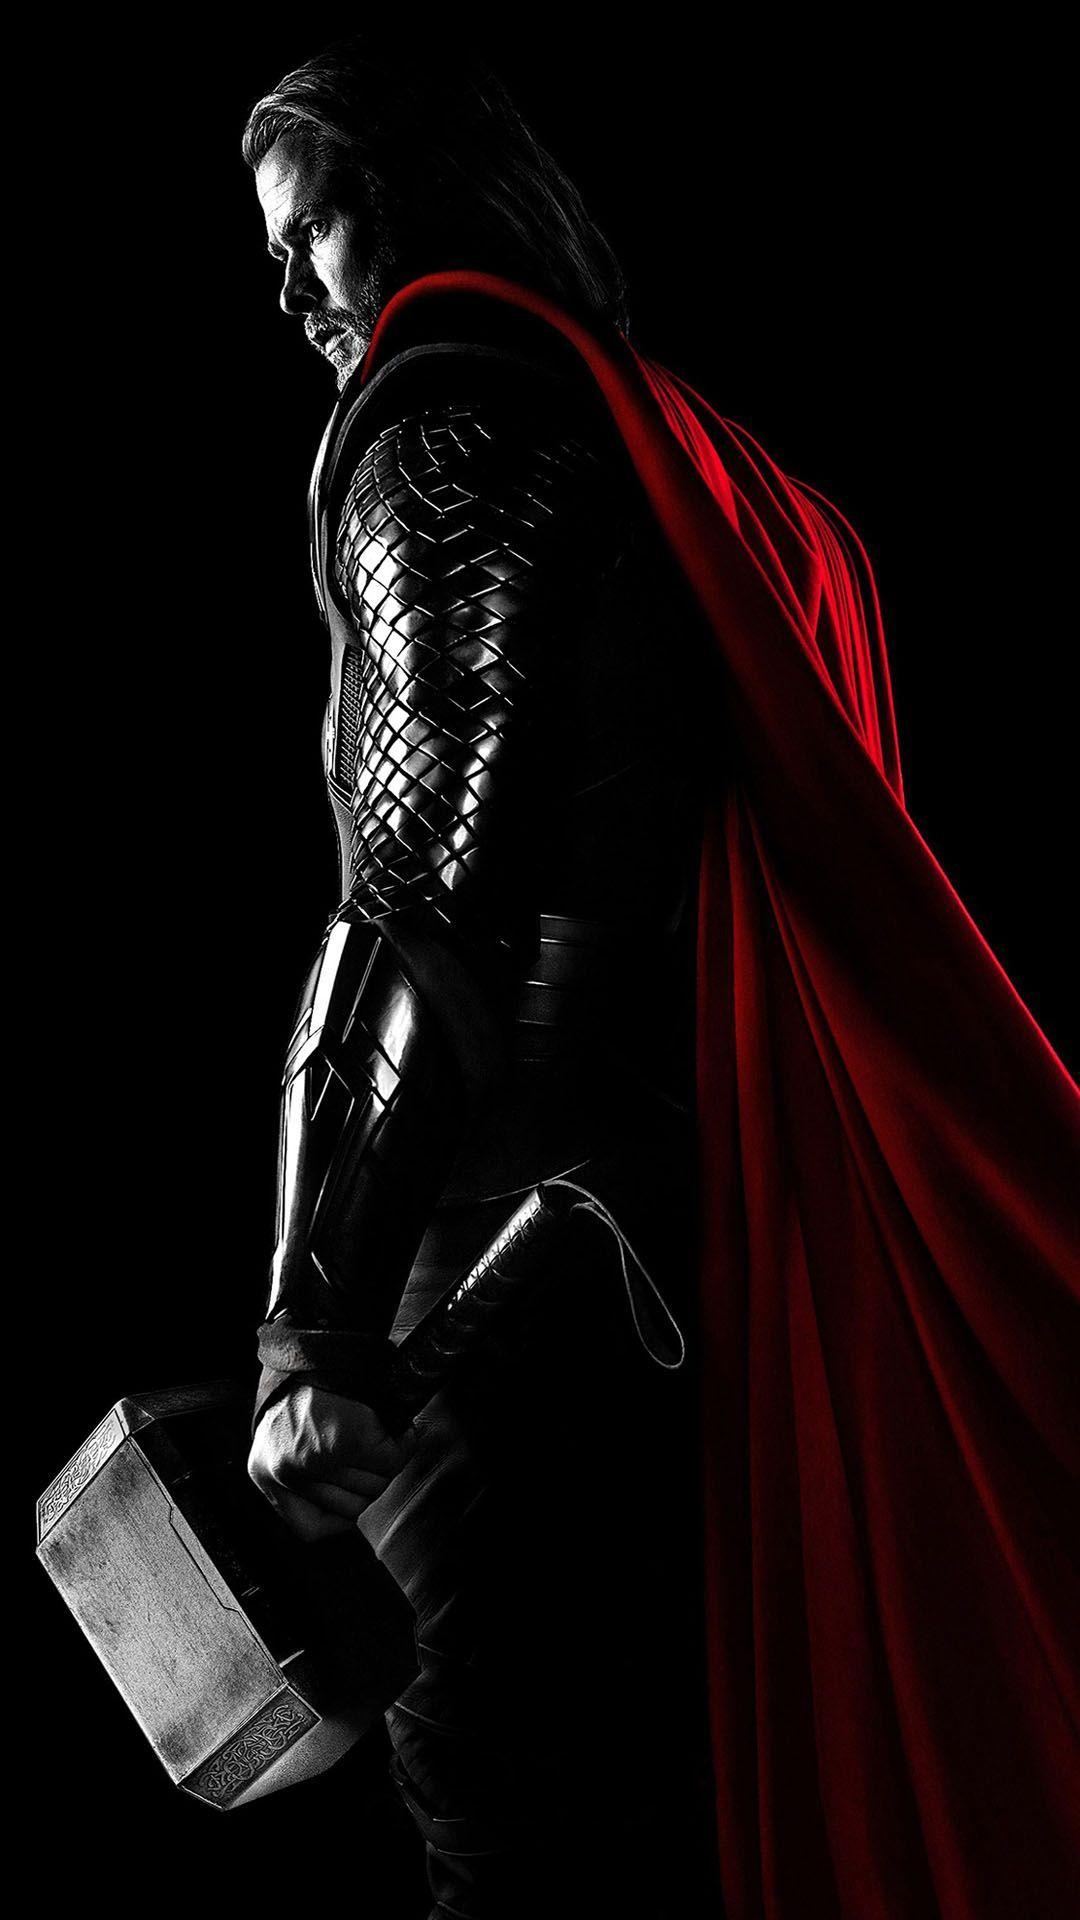 HD Samsung Wallpaper For Mobile Free Download. Thor